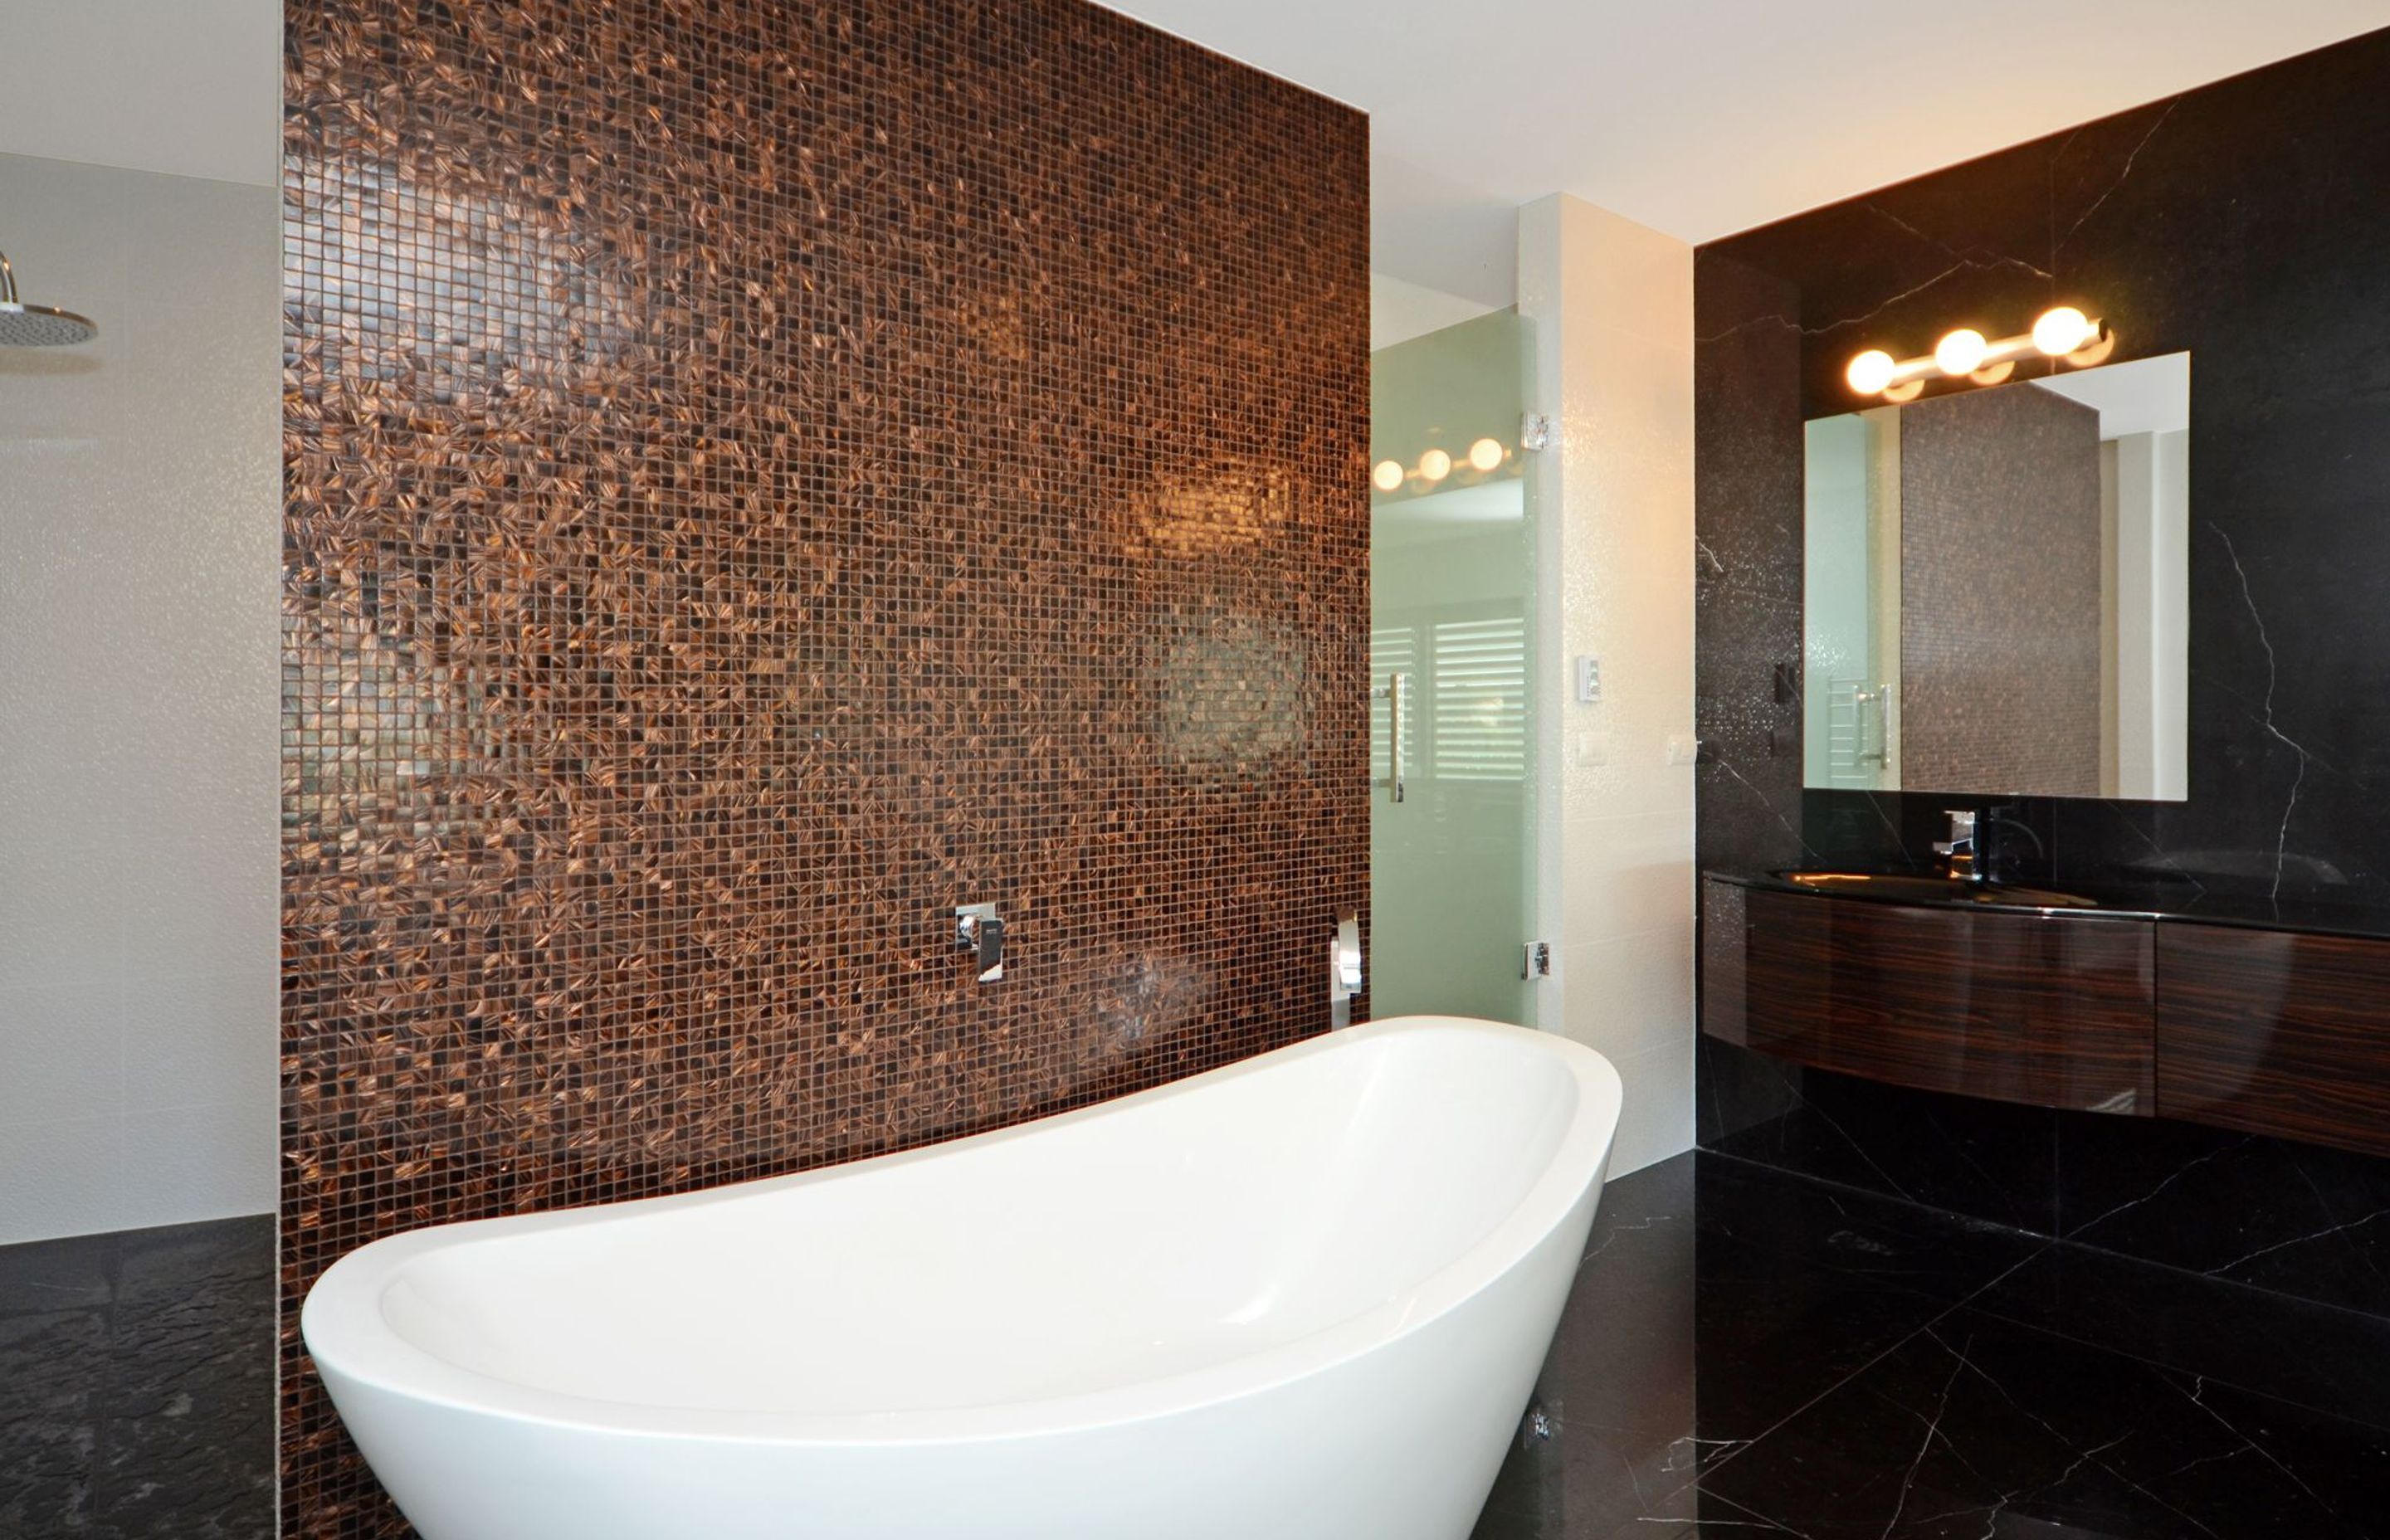 A free standing bath is backs by glass mosaics.